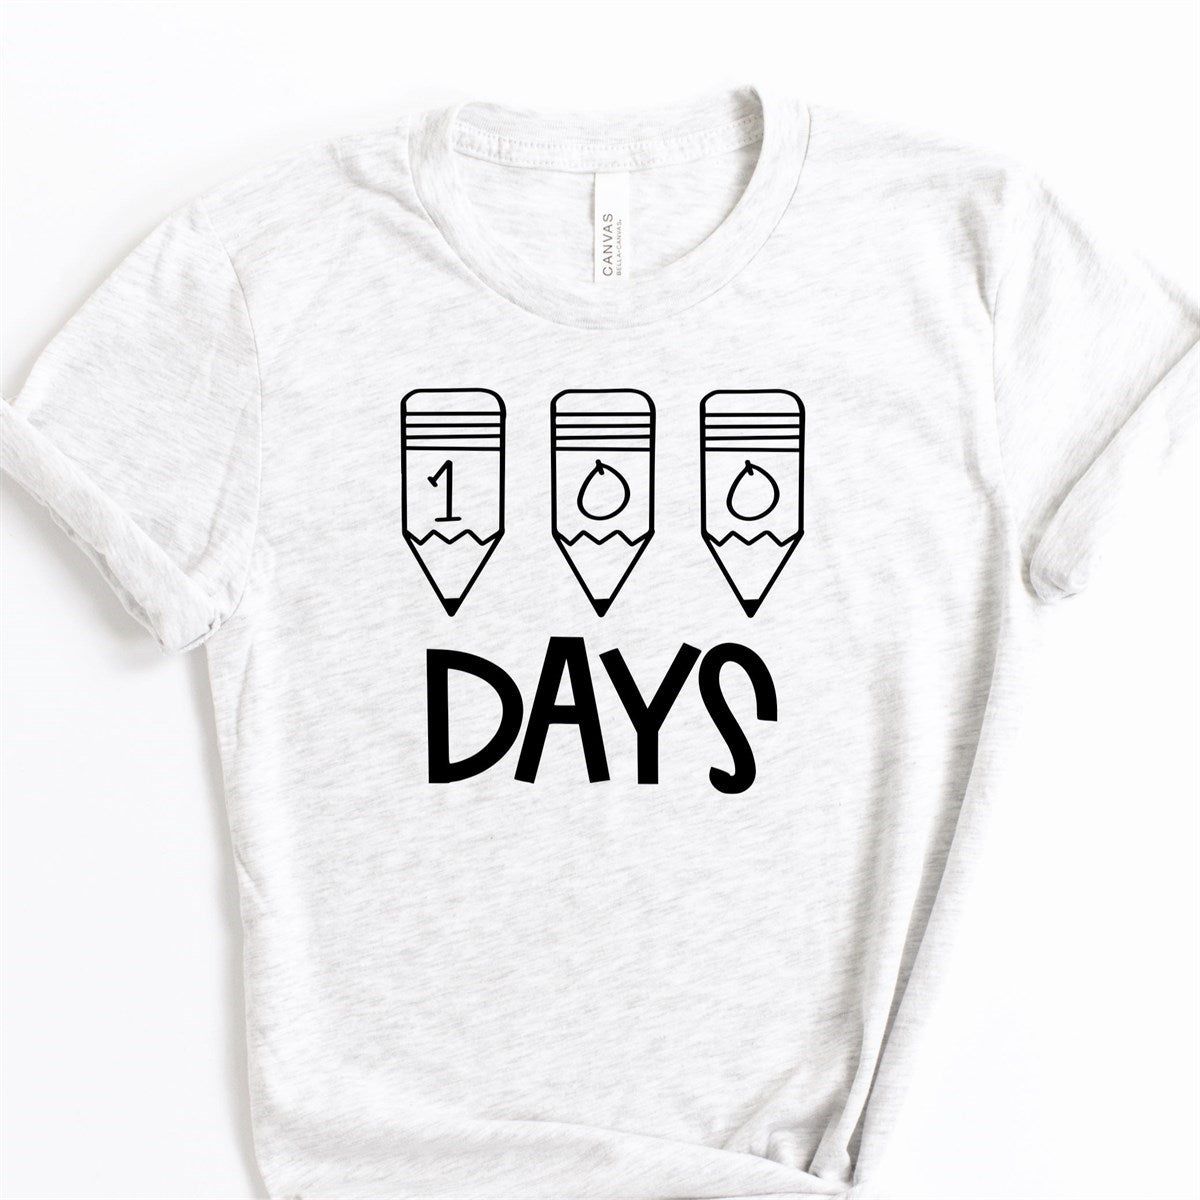 100 Days With Pencils Tee